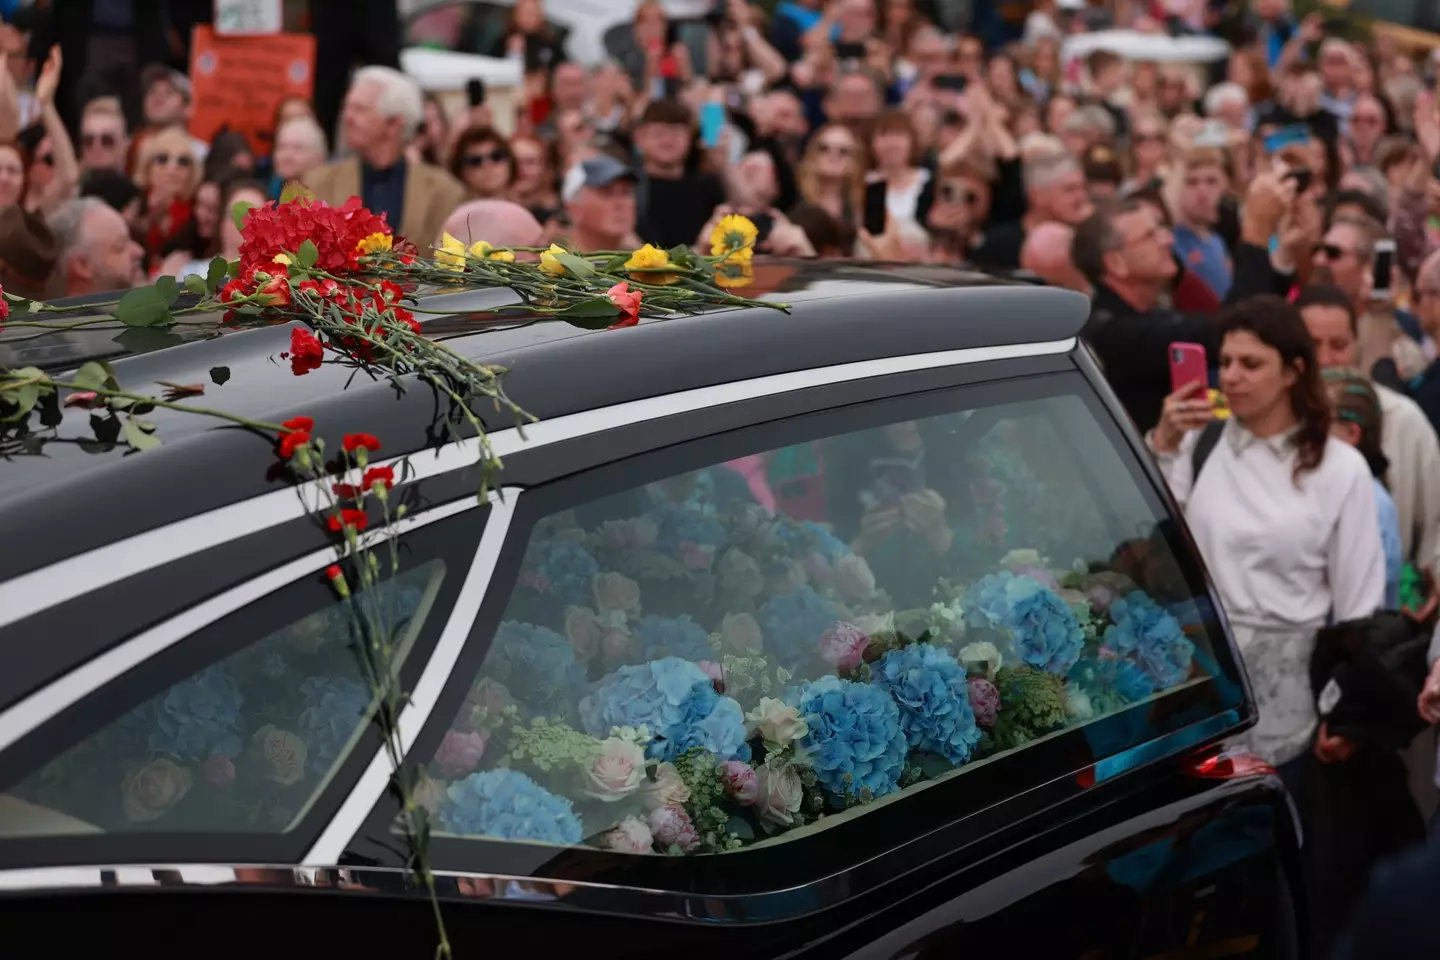 Blue flowers could be seen covering O’Connor’s coffin, while mourners also threw red and yellow flowers on to the roof of the hearse.